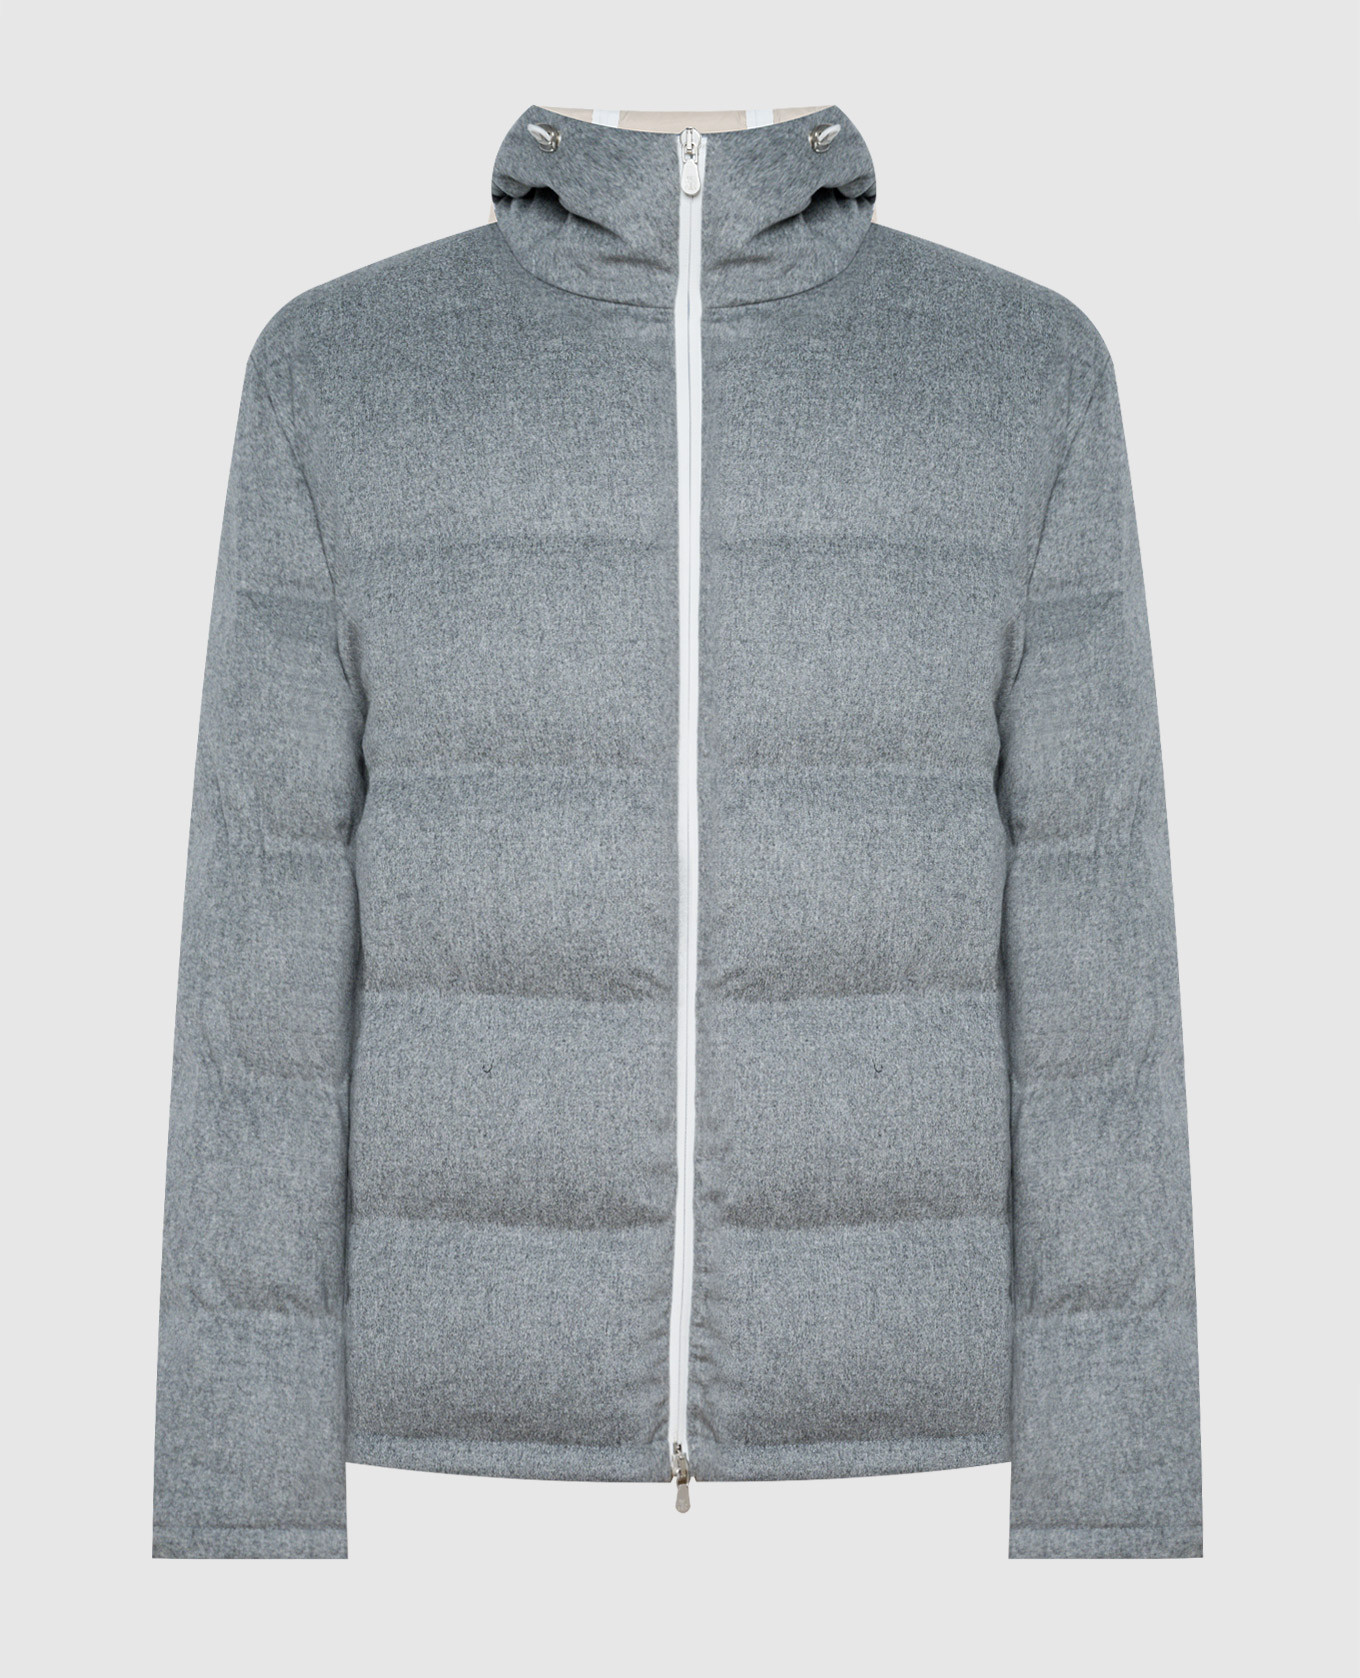 Gray down jacket made of wool